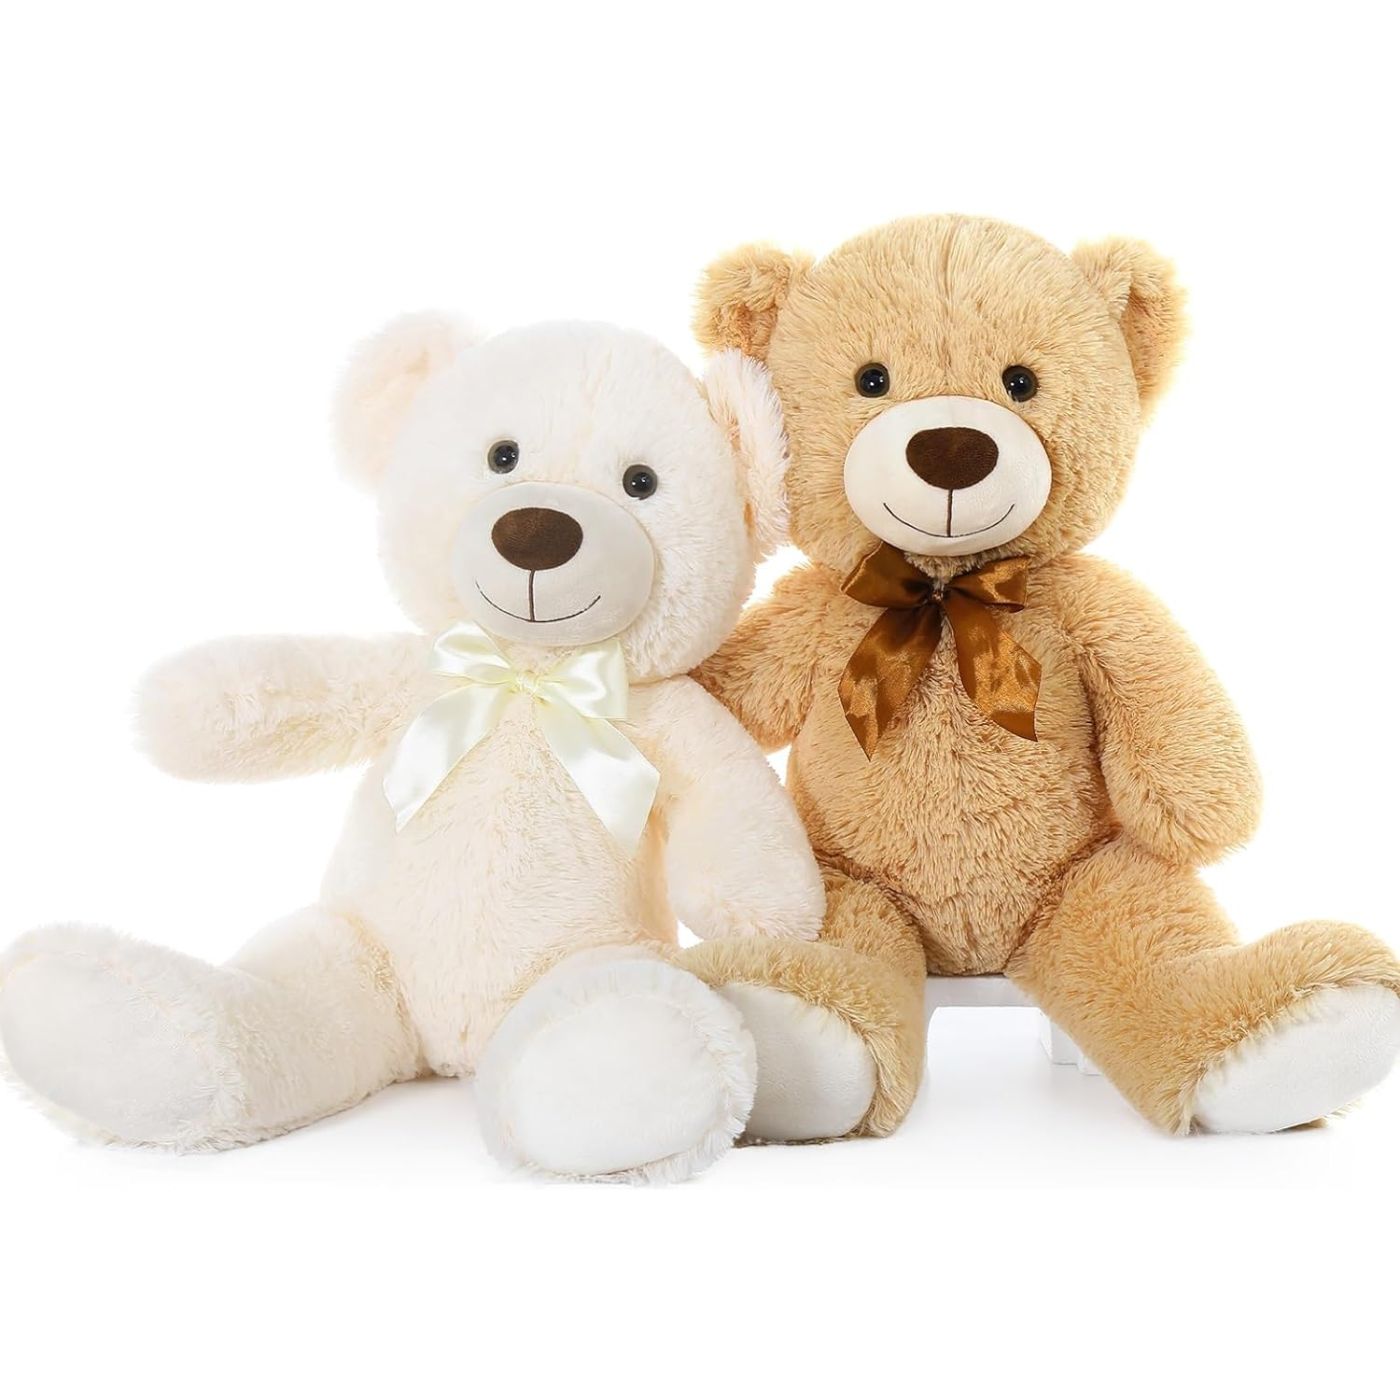 2 Pack Teddy Bear Plush Toys, Light Brown/Beige, 22 Inches